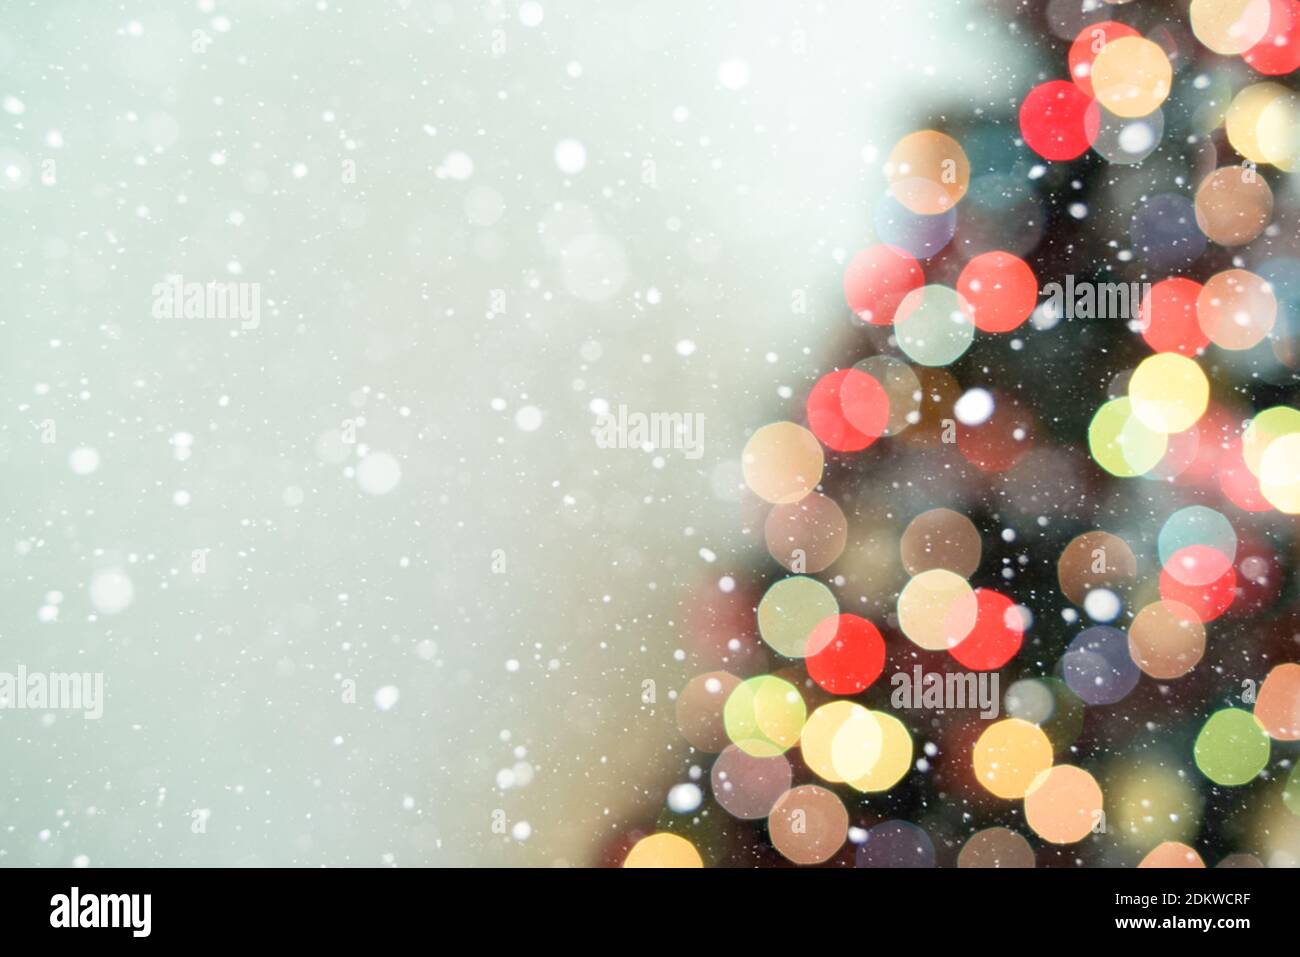 Part of blur Christmas tree lights decoration on blue background and snowflakes Stock Photo